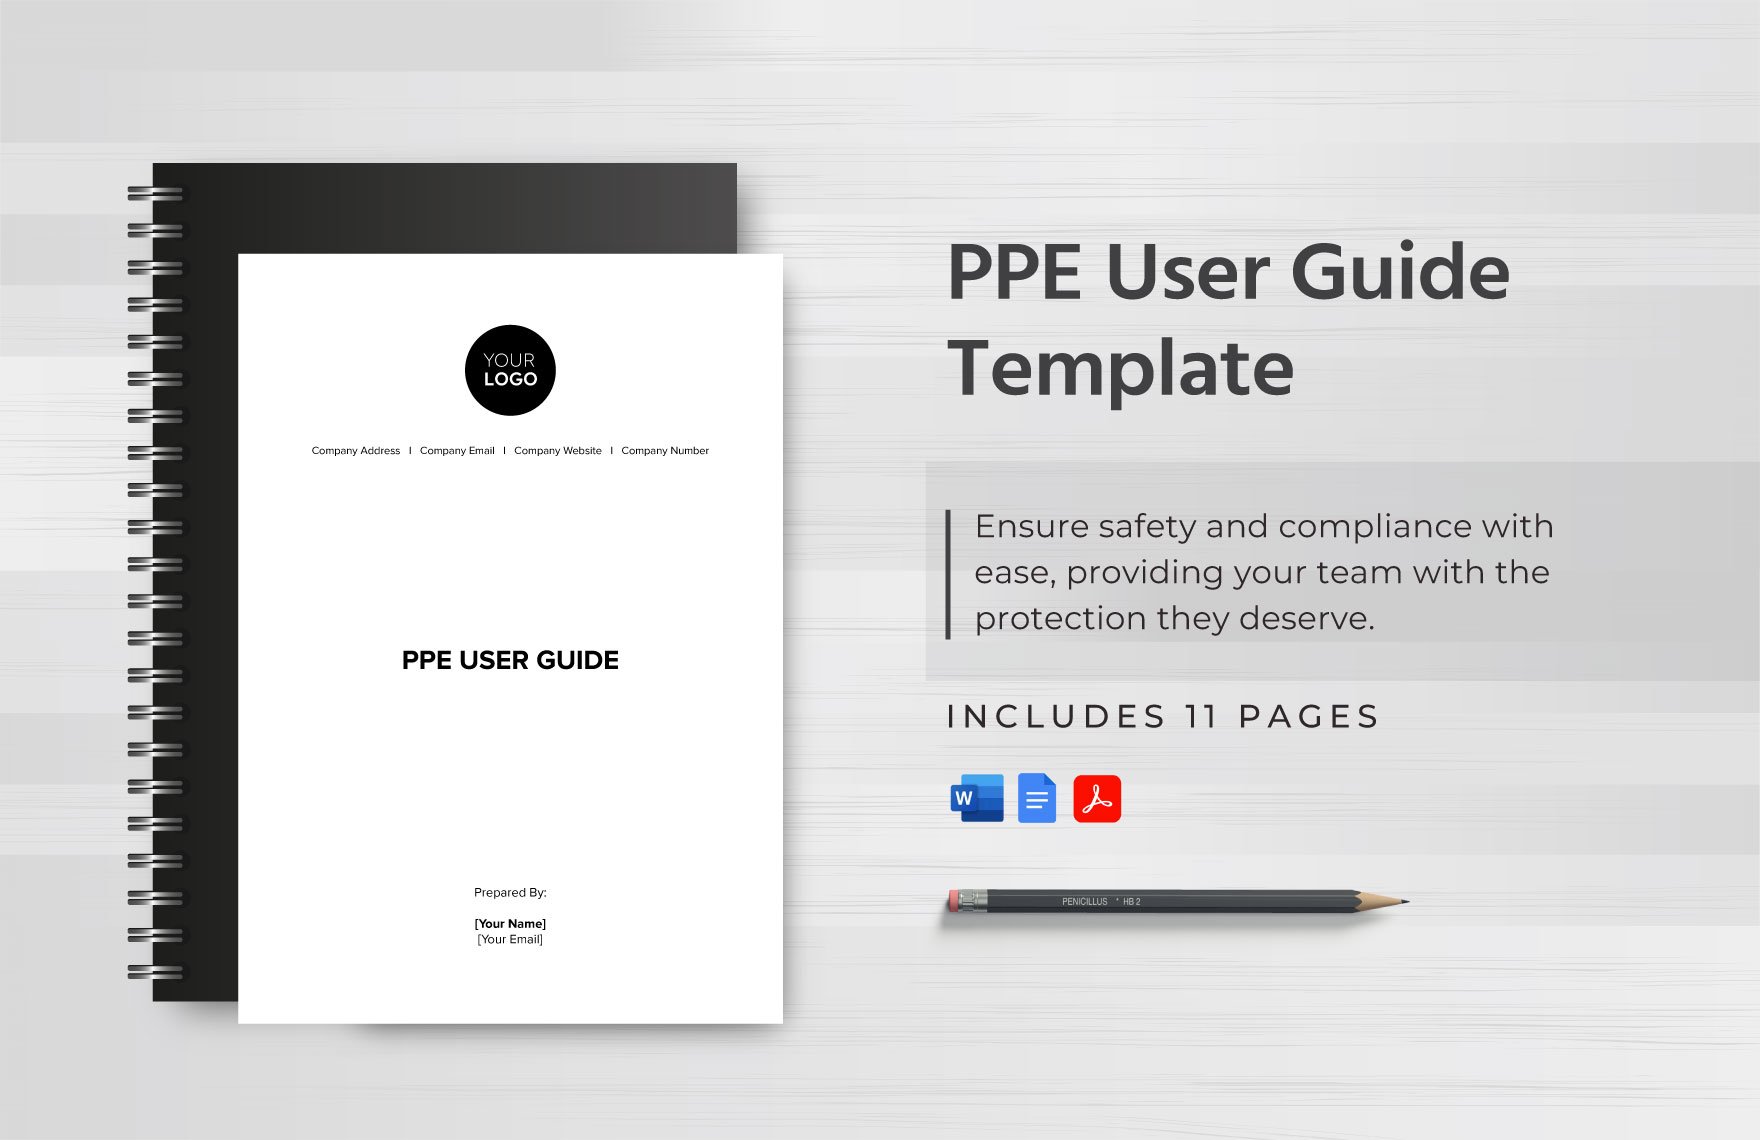 PPE User Guide Template